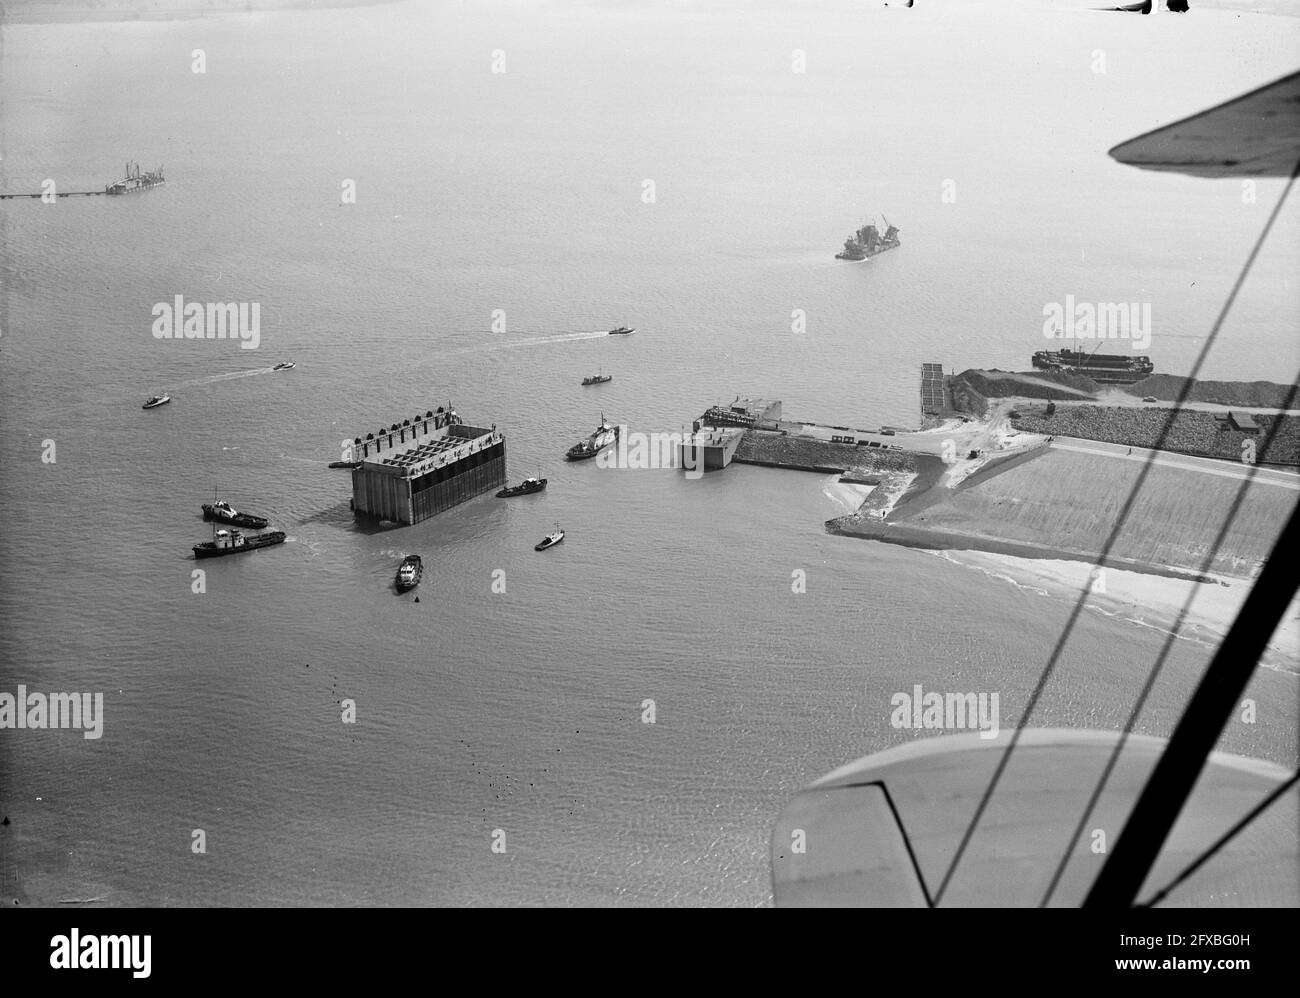 Entry of caissons into the Veerse Gat . Aerial photographs, April 13 1961, CAISSONS, The Netherlands, 20th century press agency photo, news to remember, documentary, historic photography 1945-1990, visual stories, human history of the Twentieth Century, capturing moments in time Stock Photo